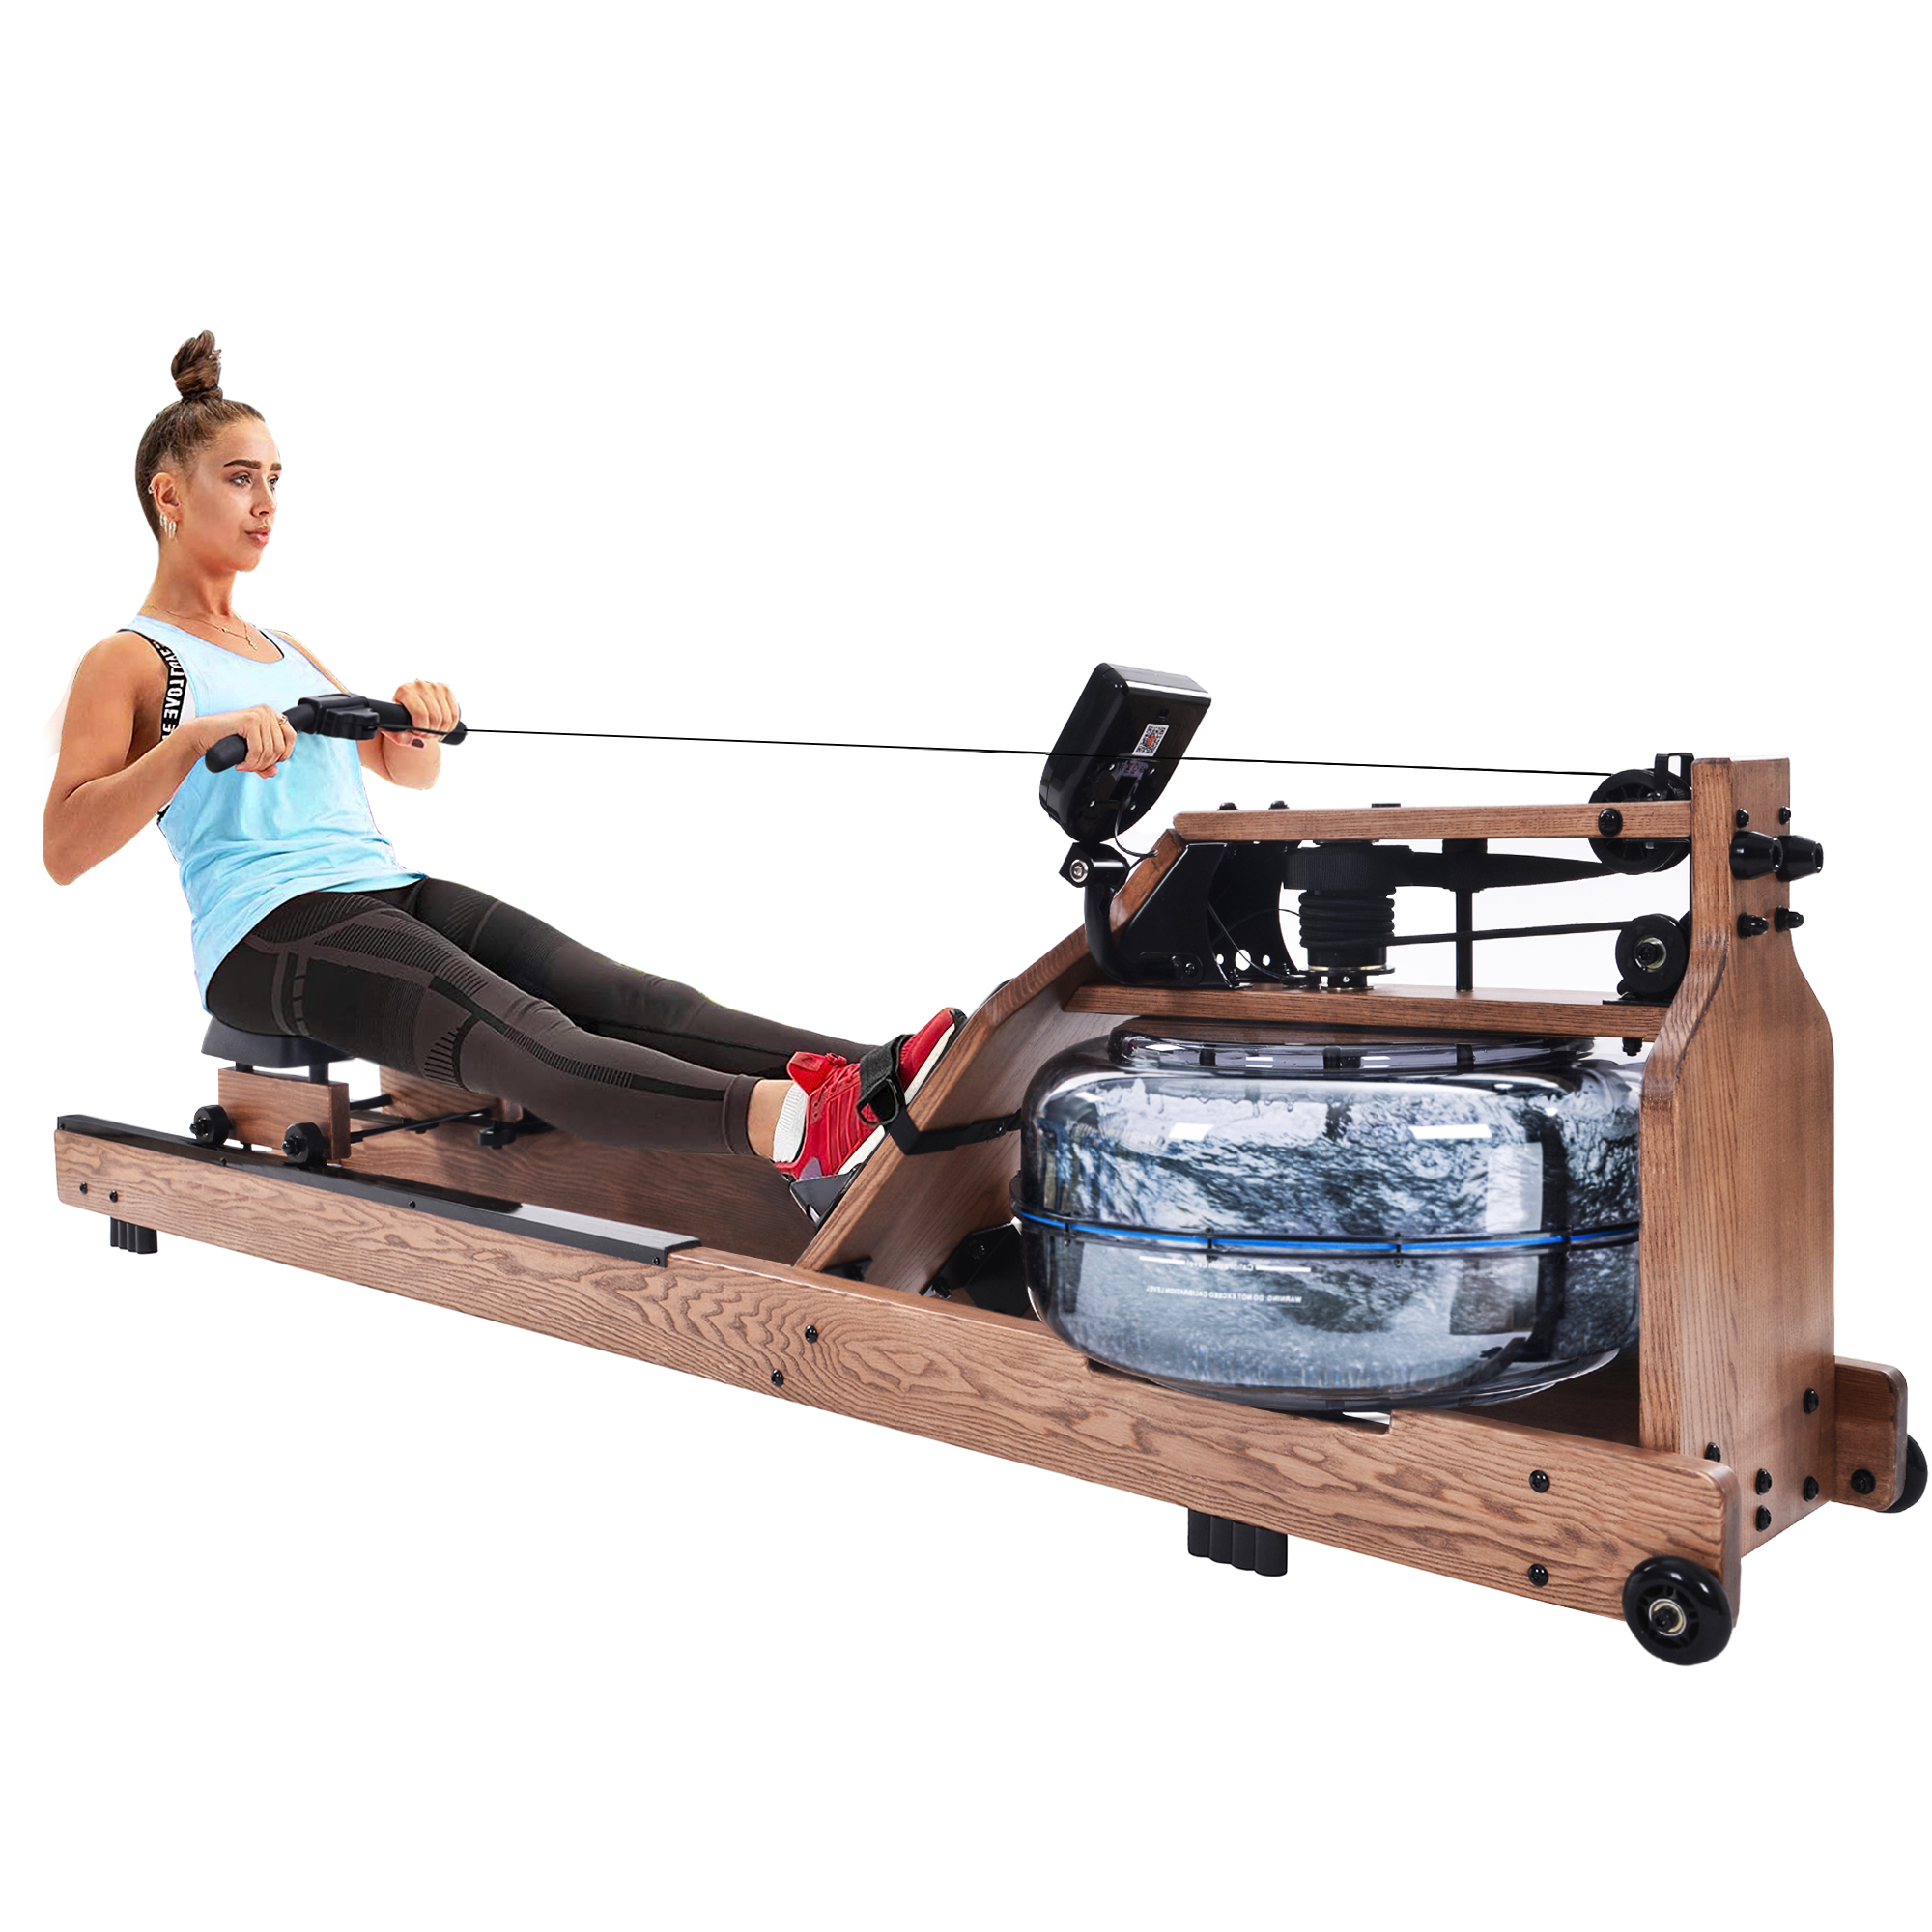 Boulevard F Water Rowing Machine For Home Use, Water Resistance Rower In Ash Wood, Home Gym Indoor Fitness Rower, Water Pump Included